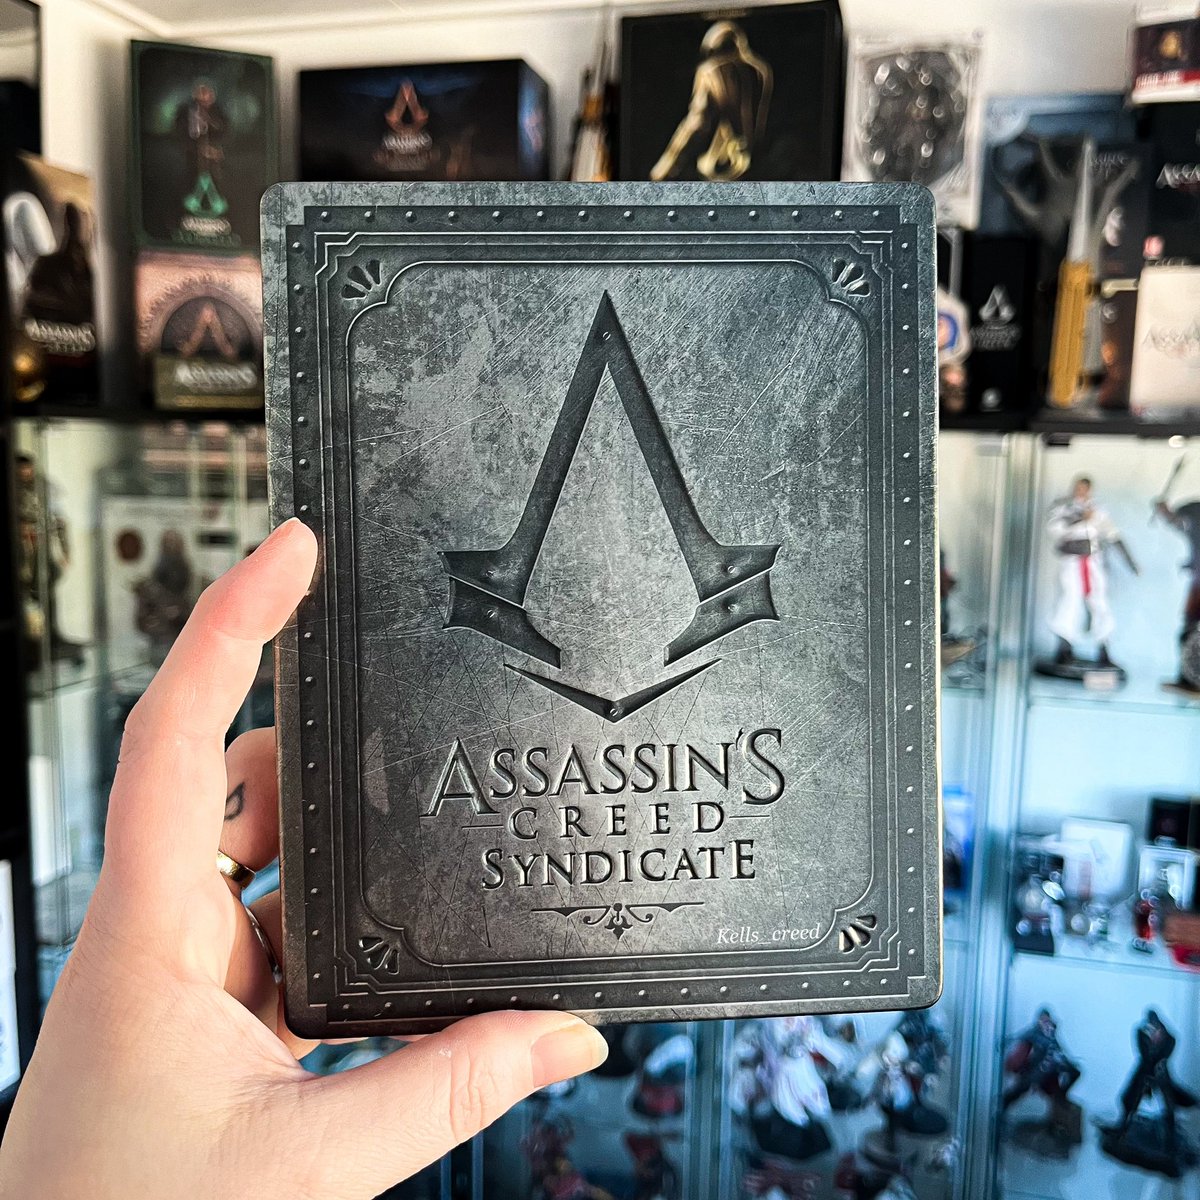 Happy Fryeday Assassins 🎩 Do have to admit that AC Syndicate is tempting me for another playthrough 👀 Hopefully I’ll return to London soon. But first priorities and FF7 Rebirth🤩 What are your weekend plans guys? 🔥 #AssassinsCreedSyndicate #AssassinsCreed #FF7R